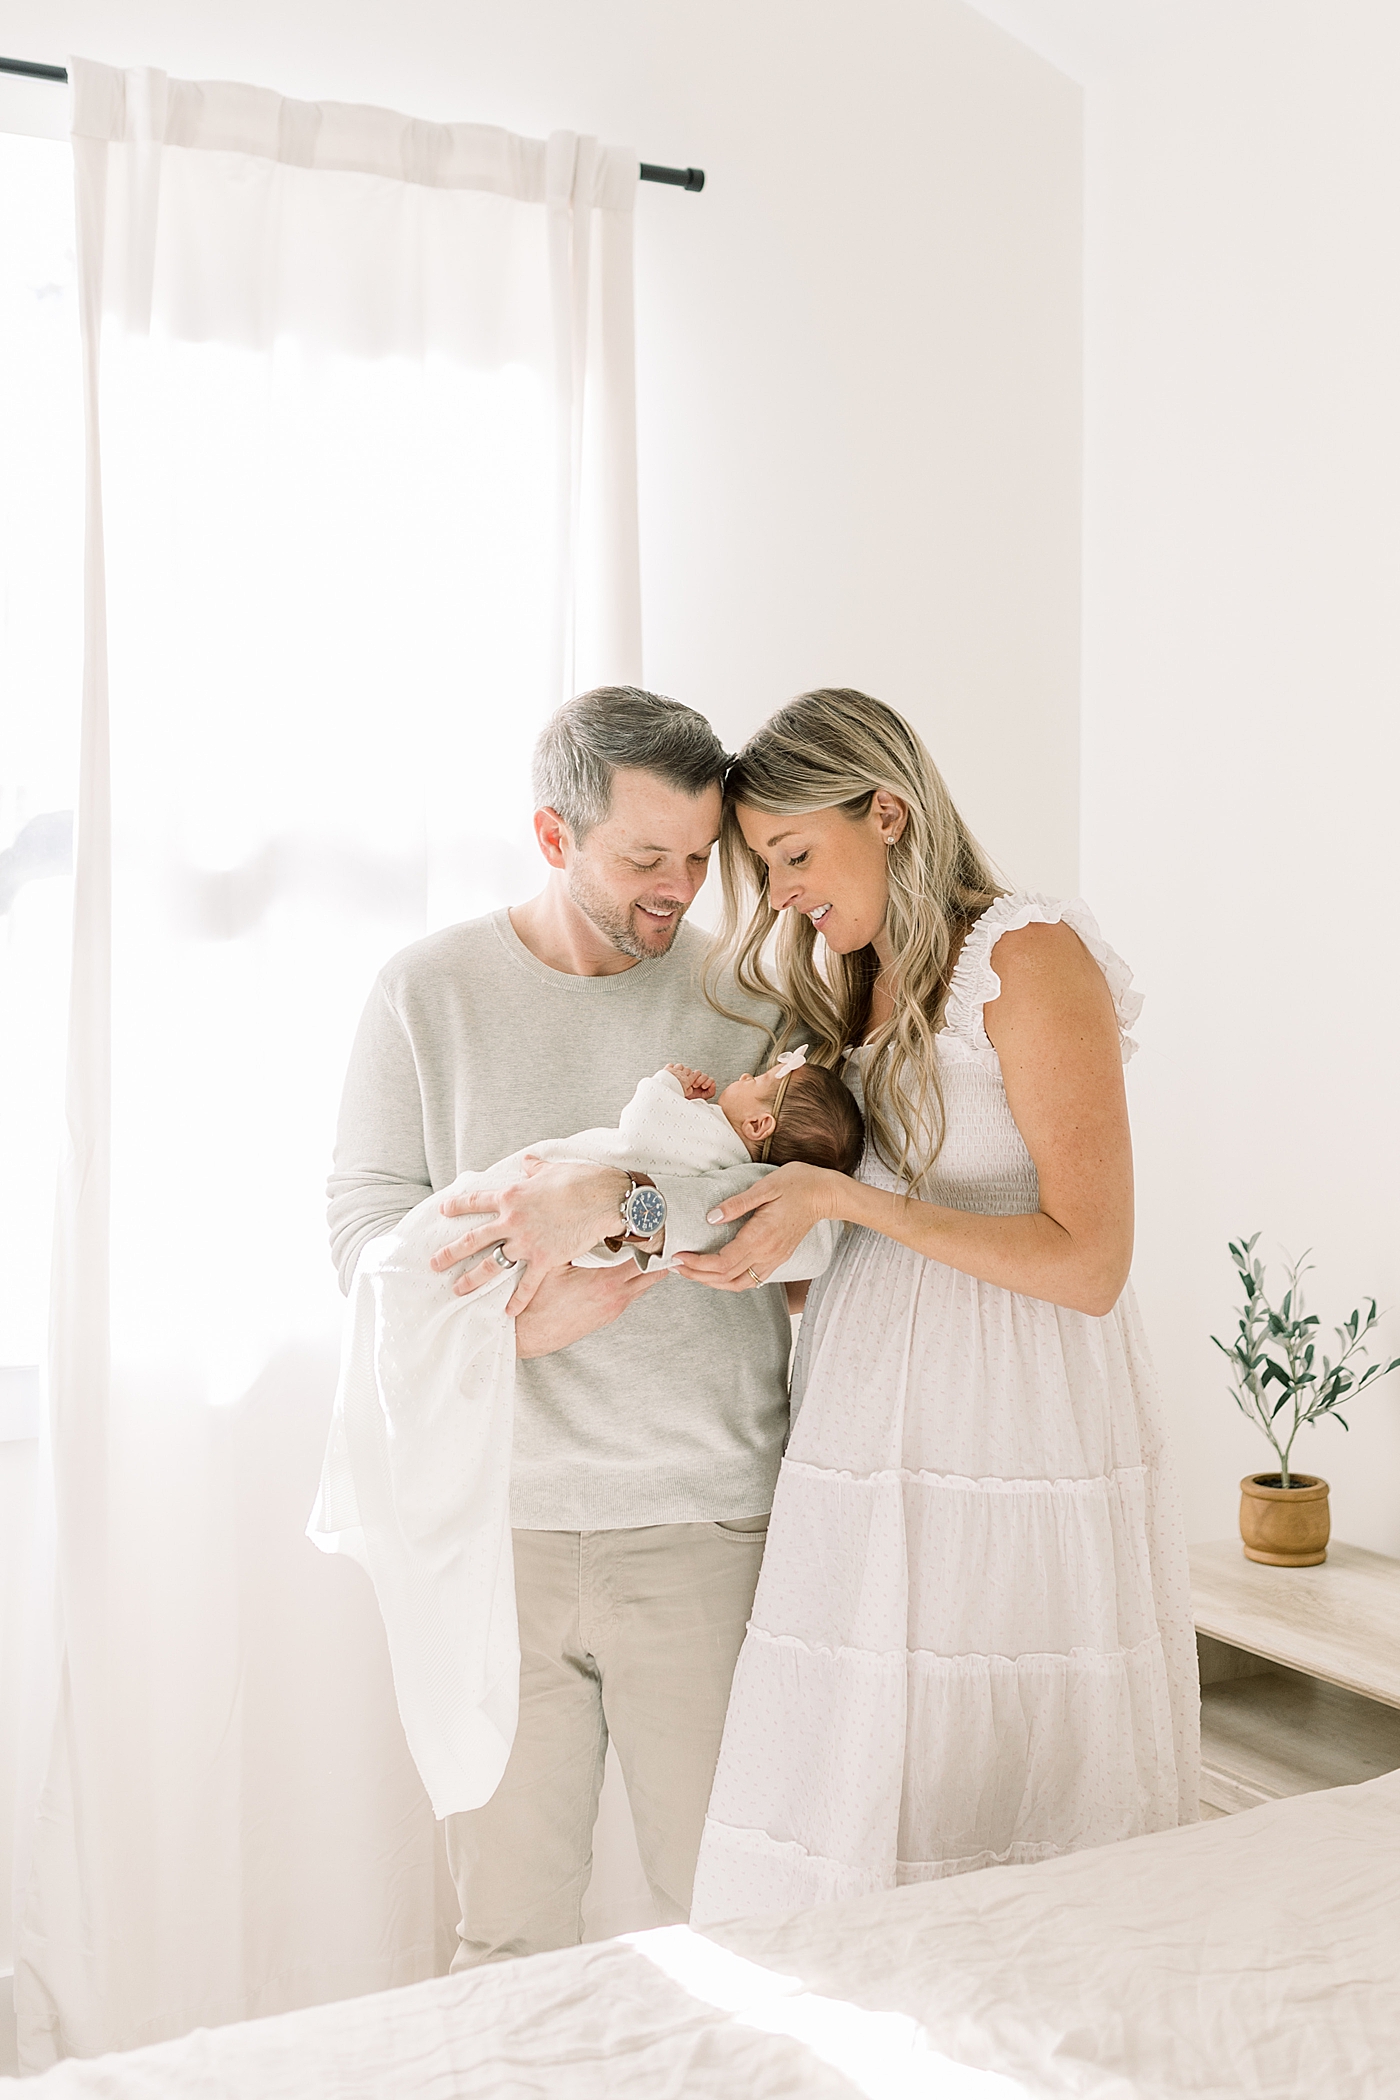 Mom and dad holding their newborn in their bedroom | Image by Caitlyn Motycka